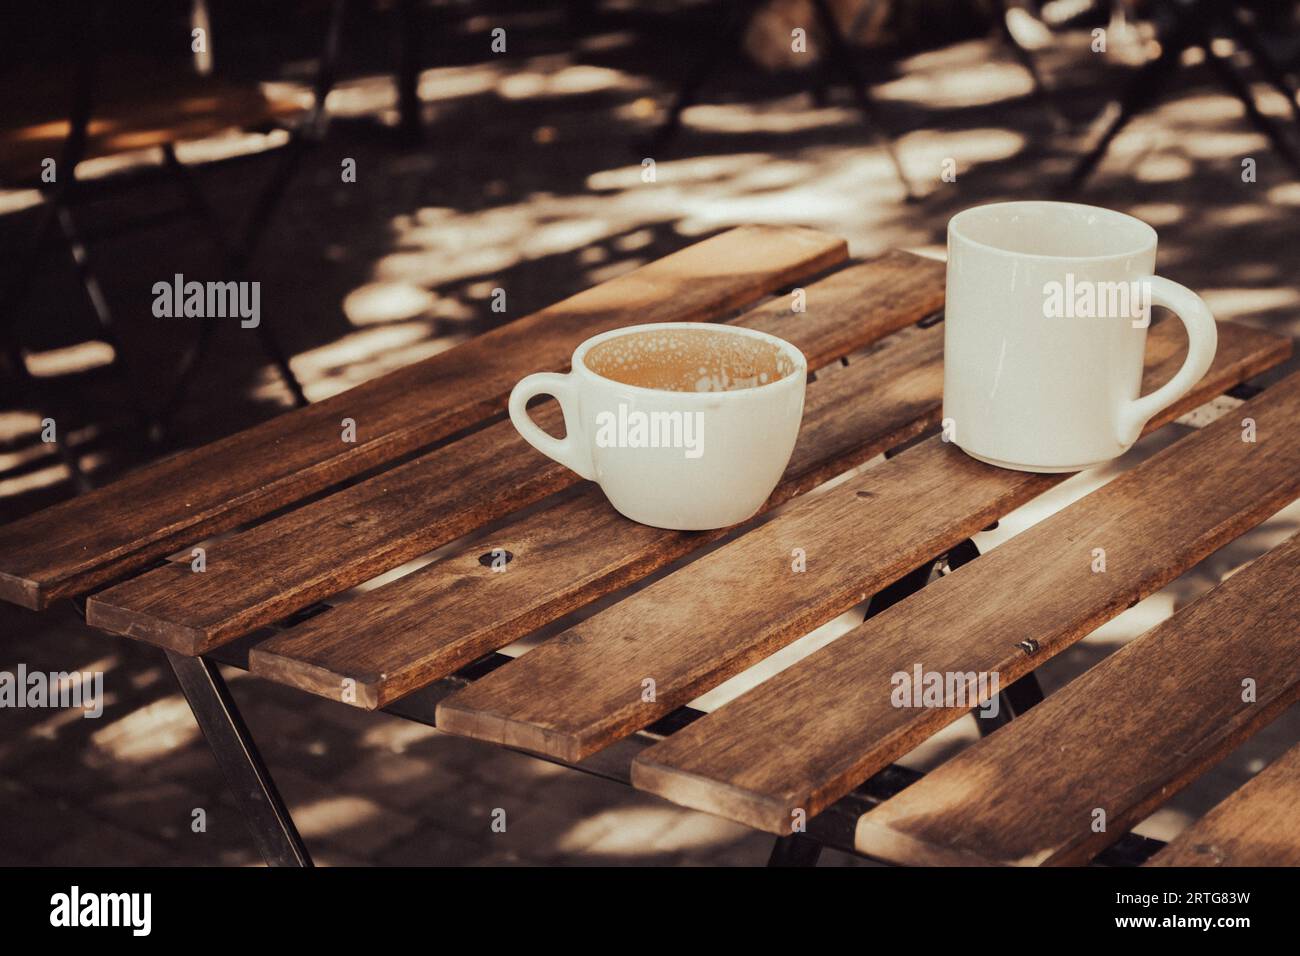 Two empty coffee cups on wooden table. Breakfast table. Sidewalk cafe furniture. Morning drinks. Cappuccino in white mugs. Daily urban lifestyles. Stock Photo